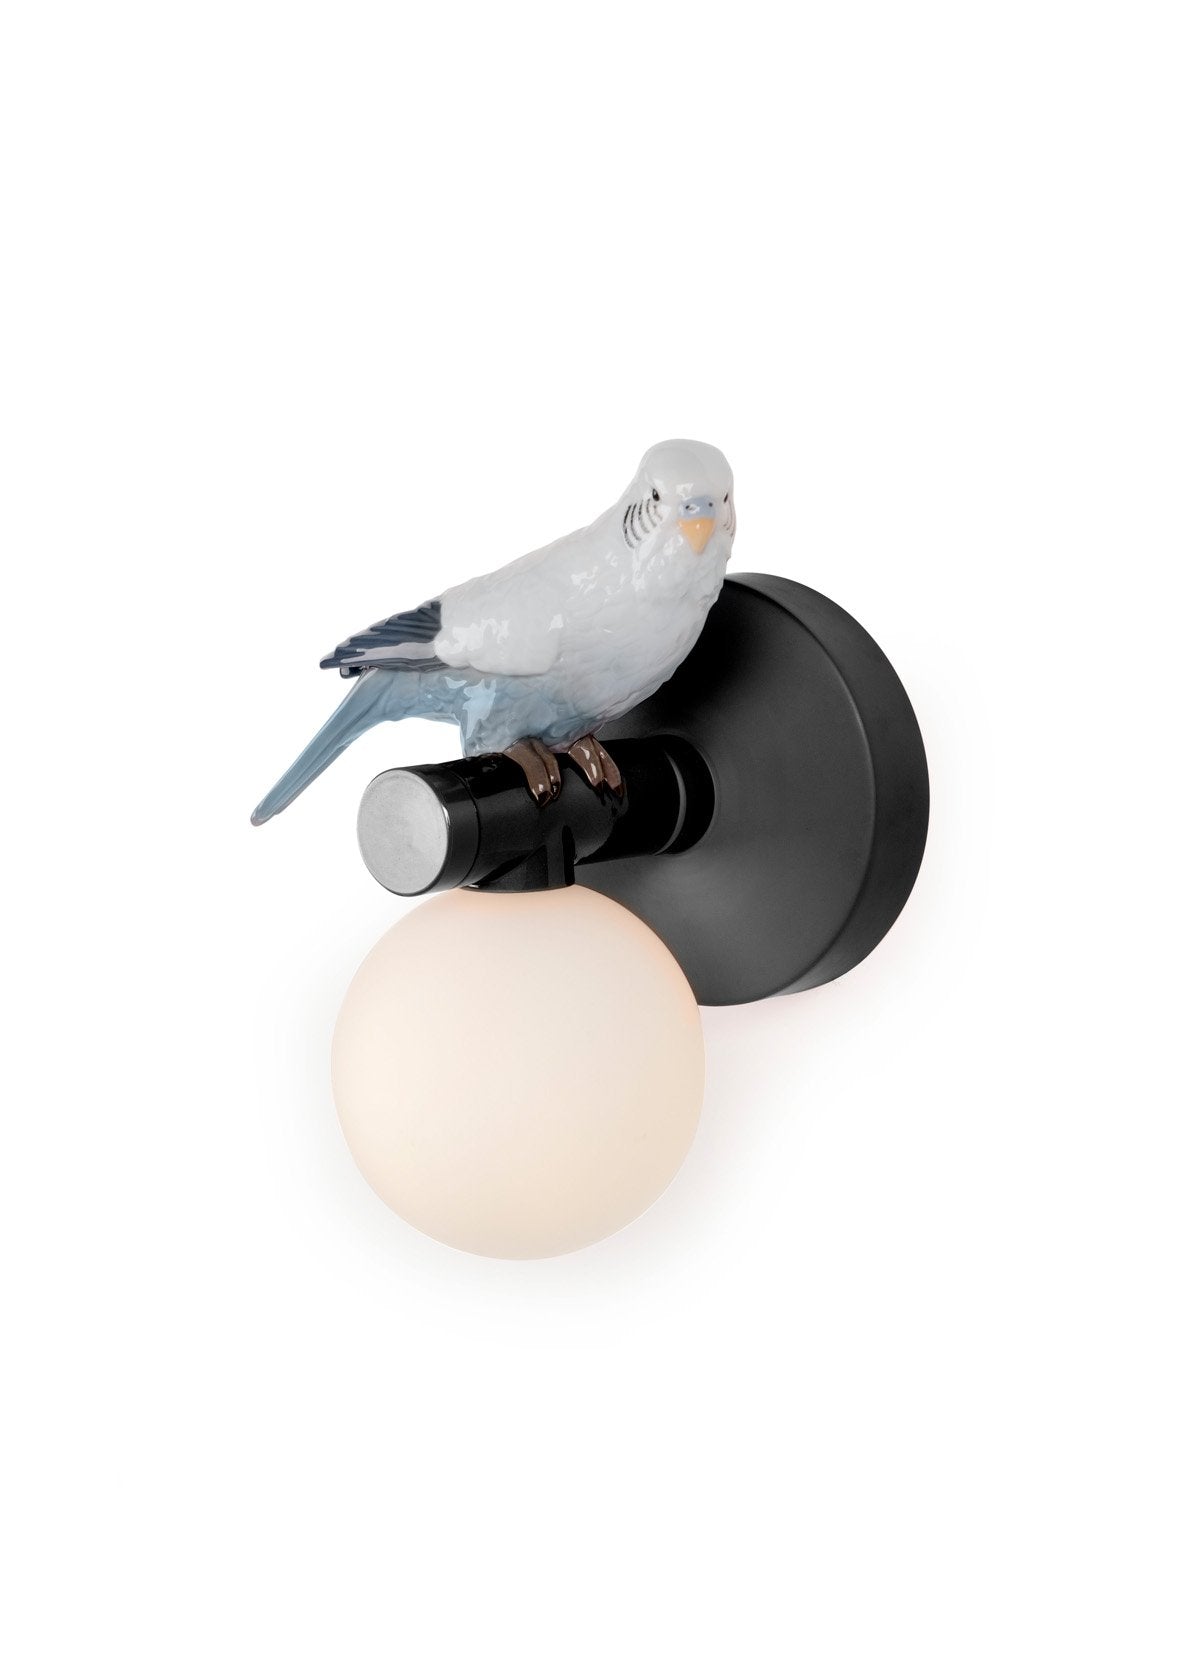 Parrot Party Wall Lamp (Right) - FormFluent